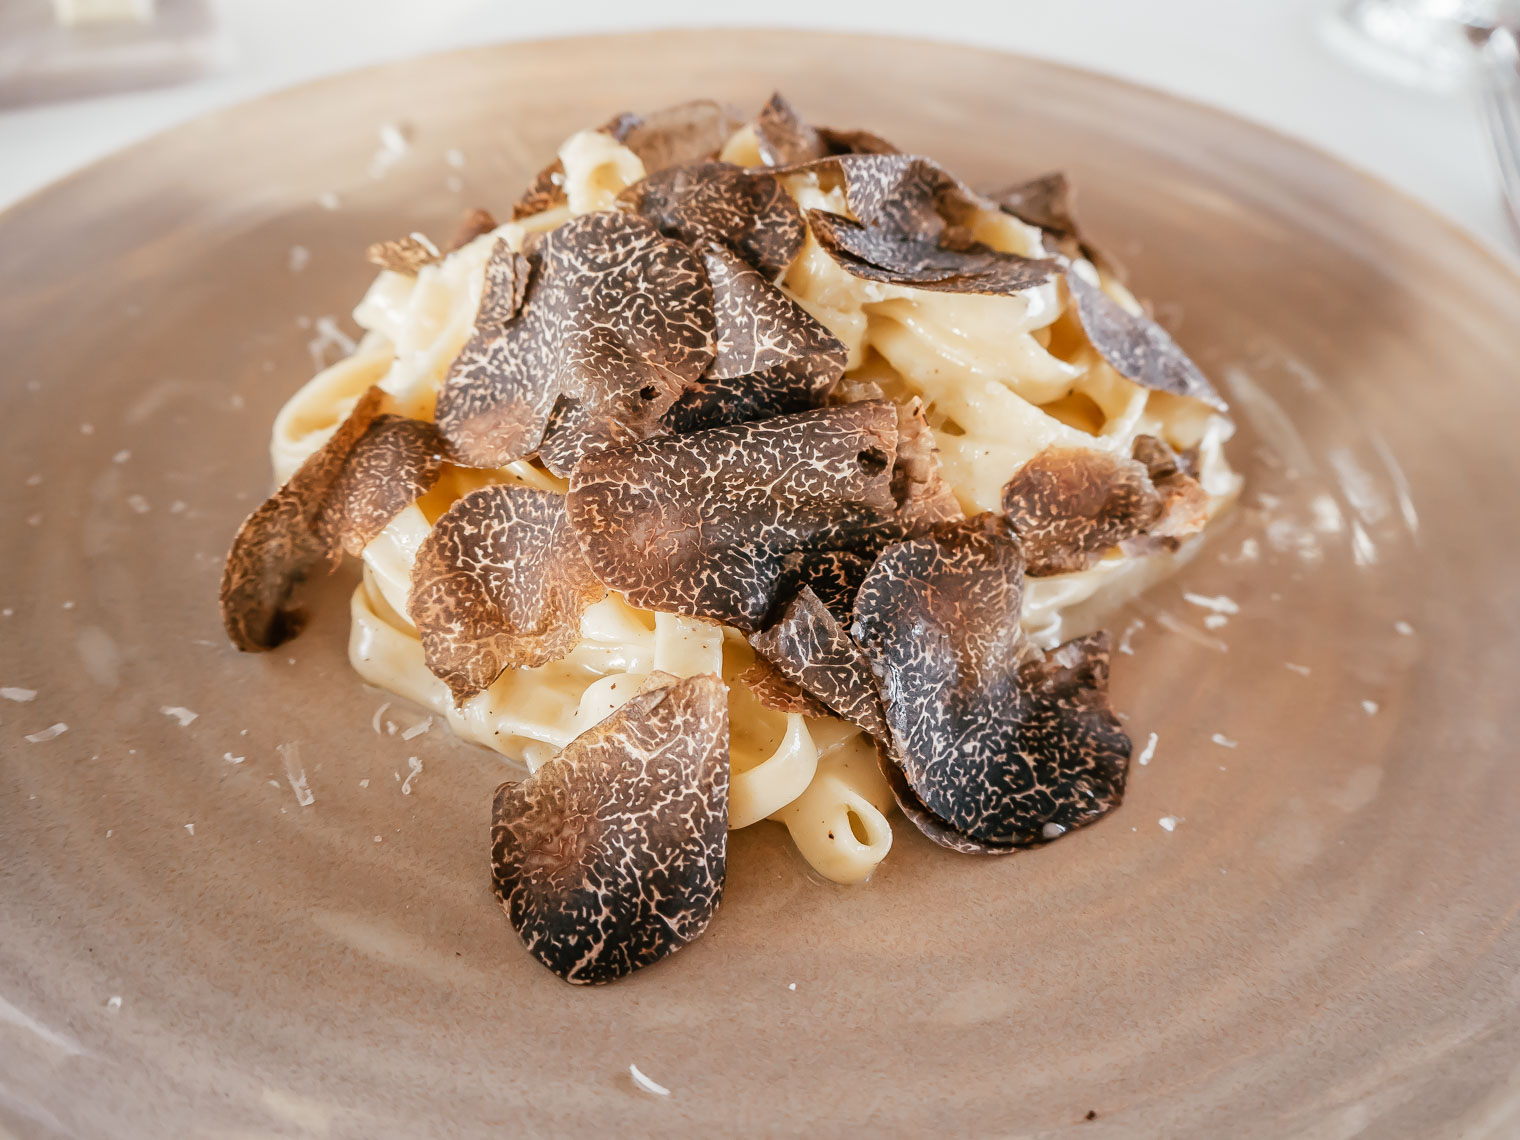 Tagliatelle with truffle and parmesan at Spago Singapore What to eat at Spago Singapore